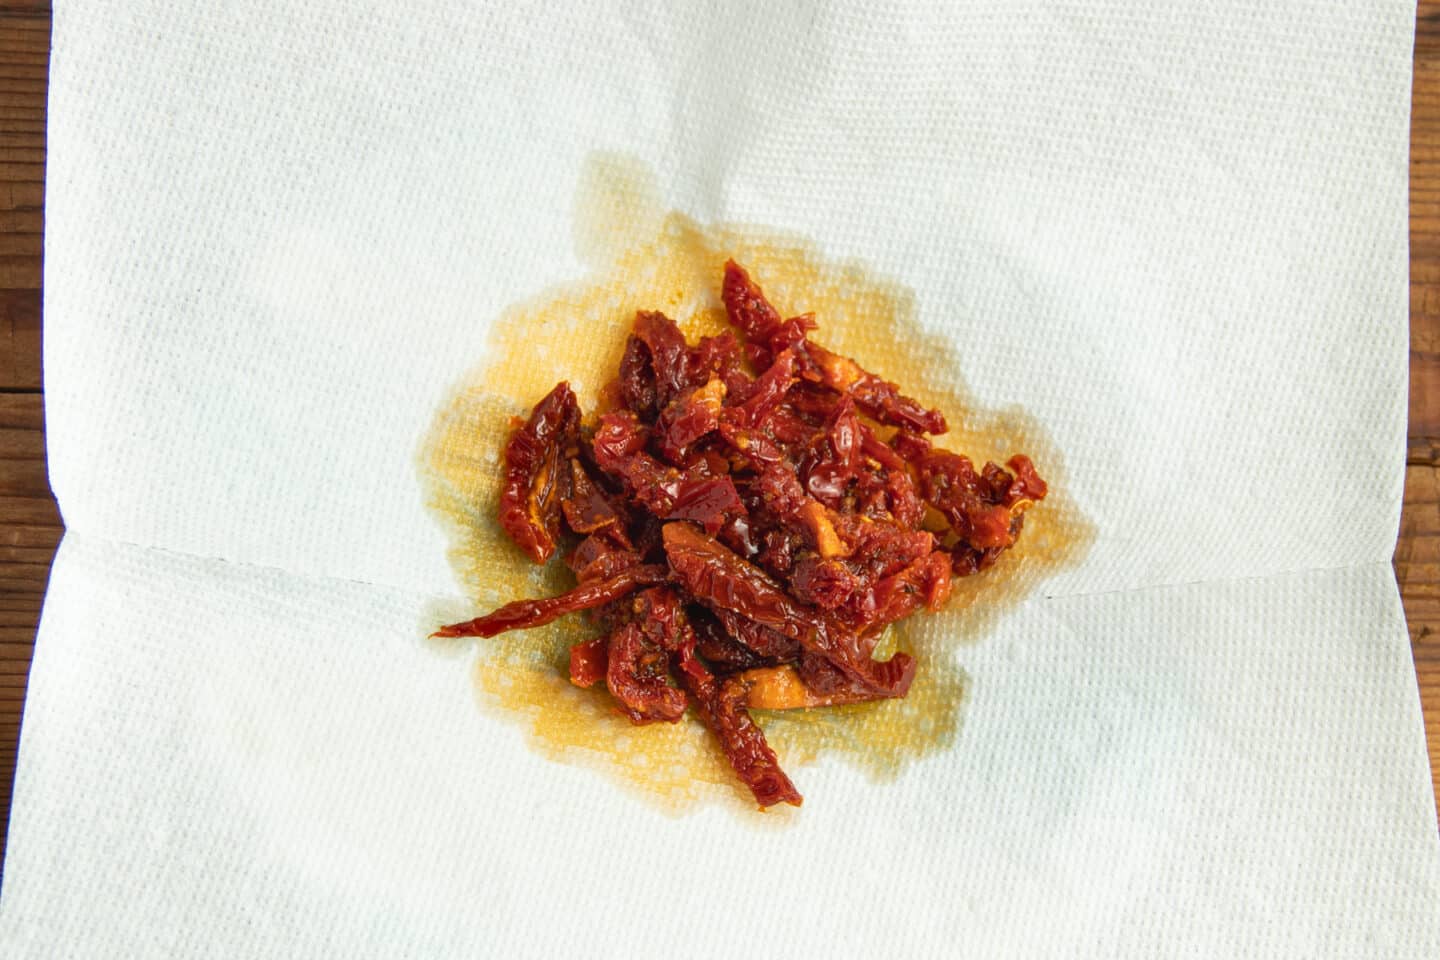 This is a picture of sun-dried tomatoes on paper towels.